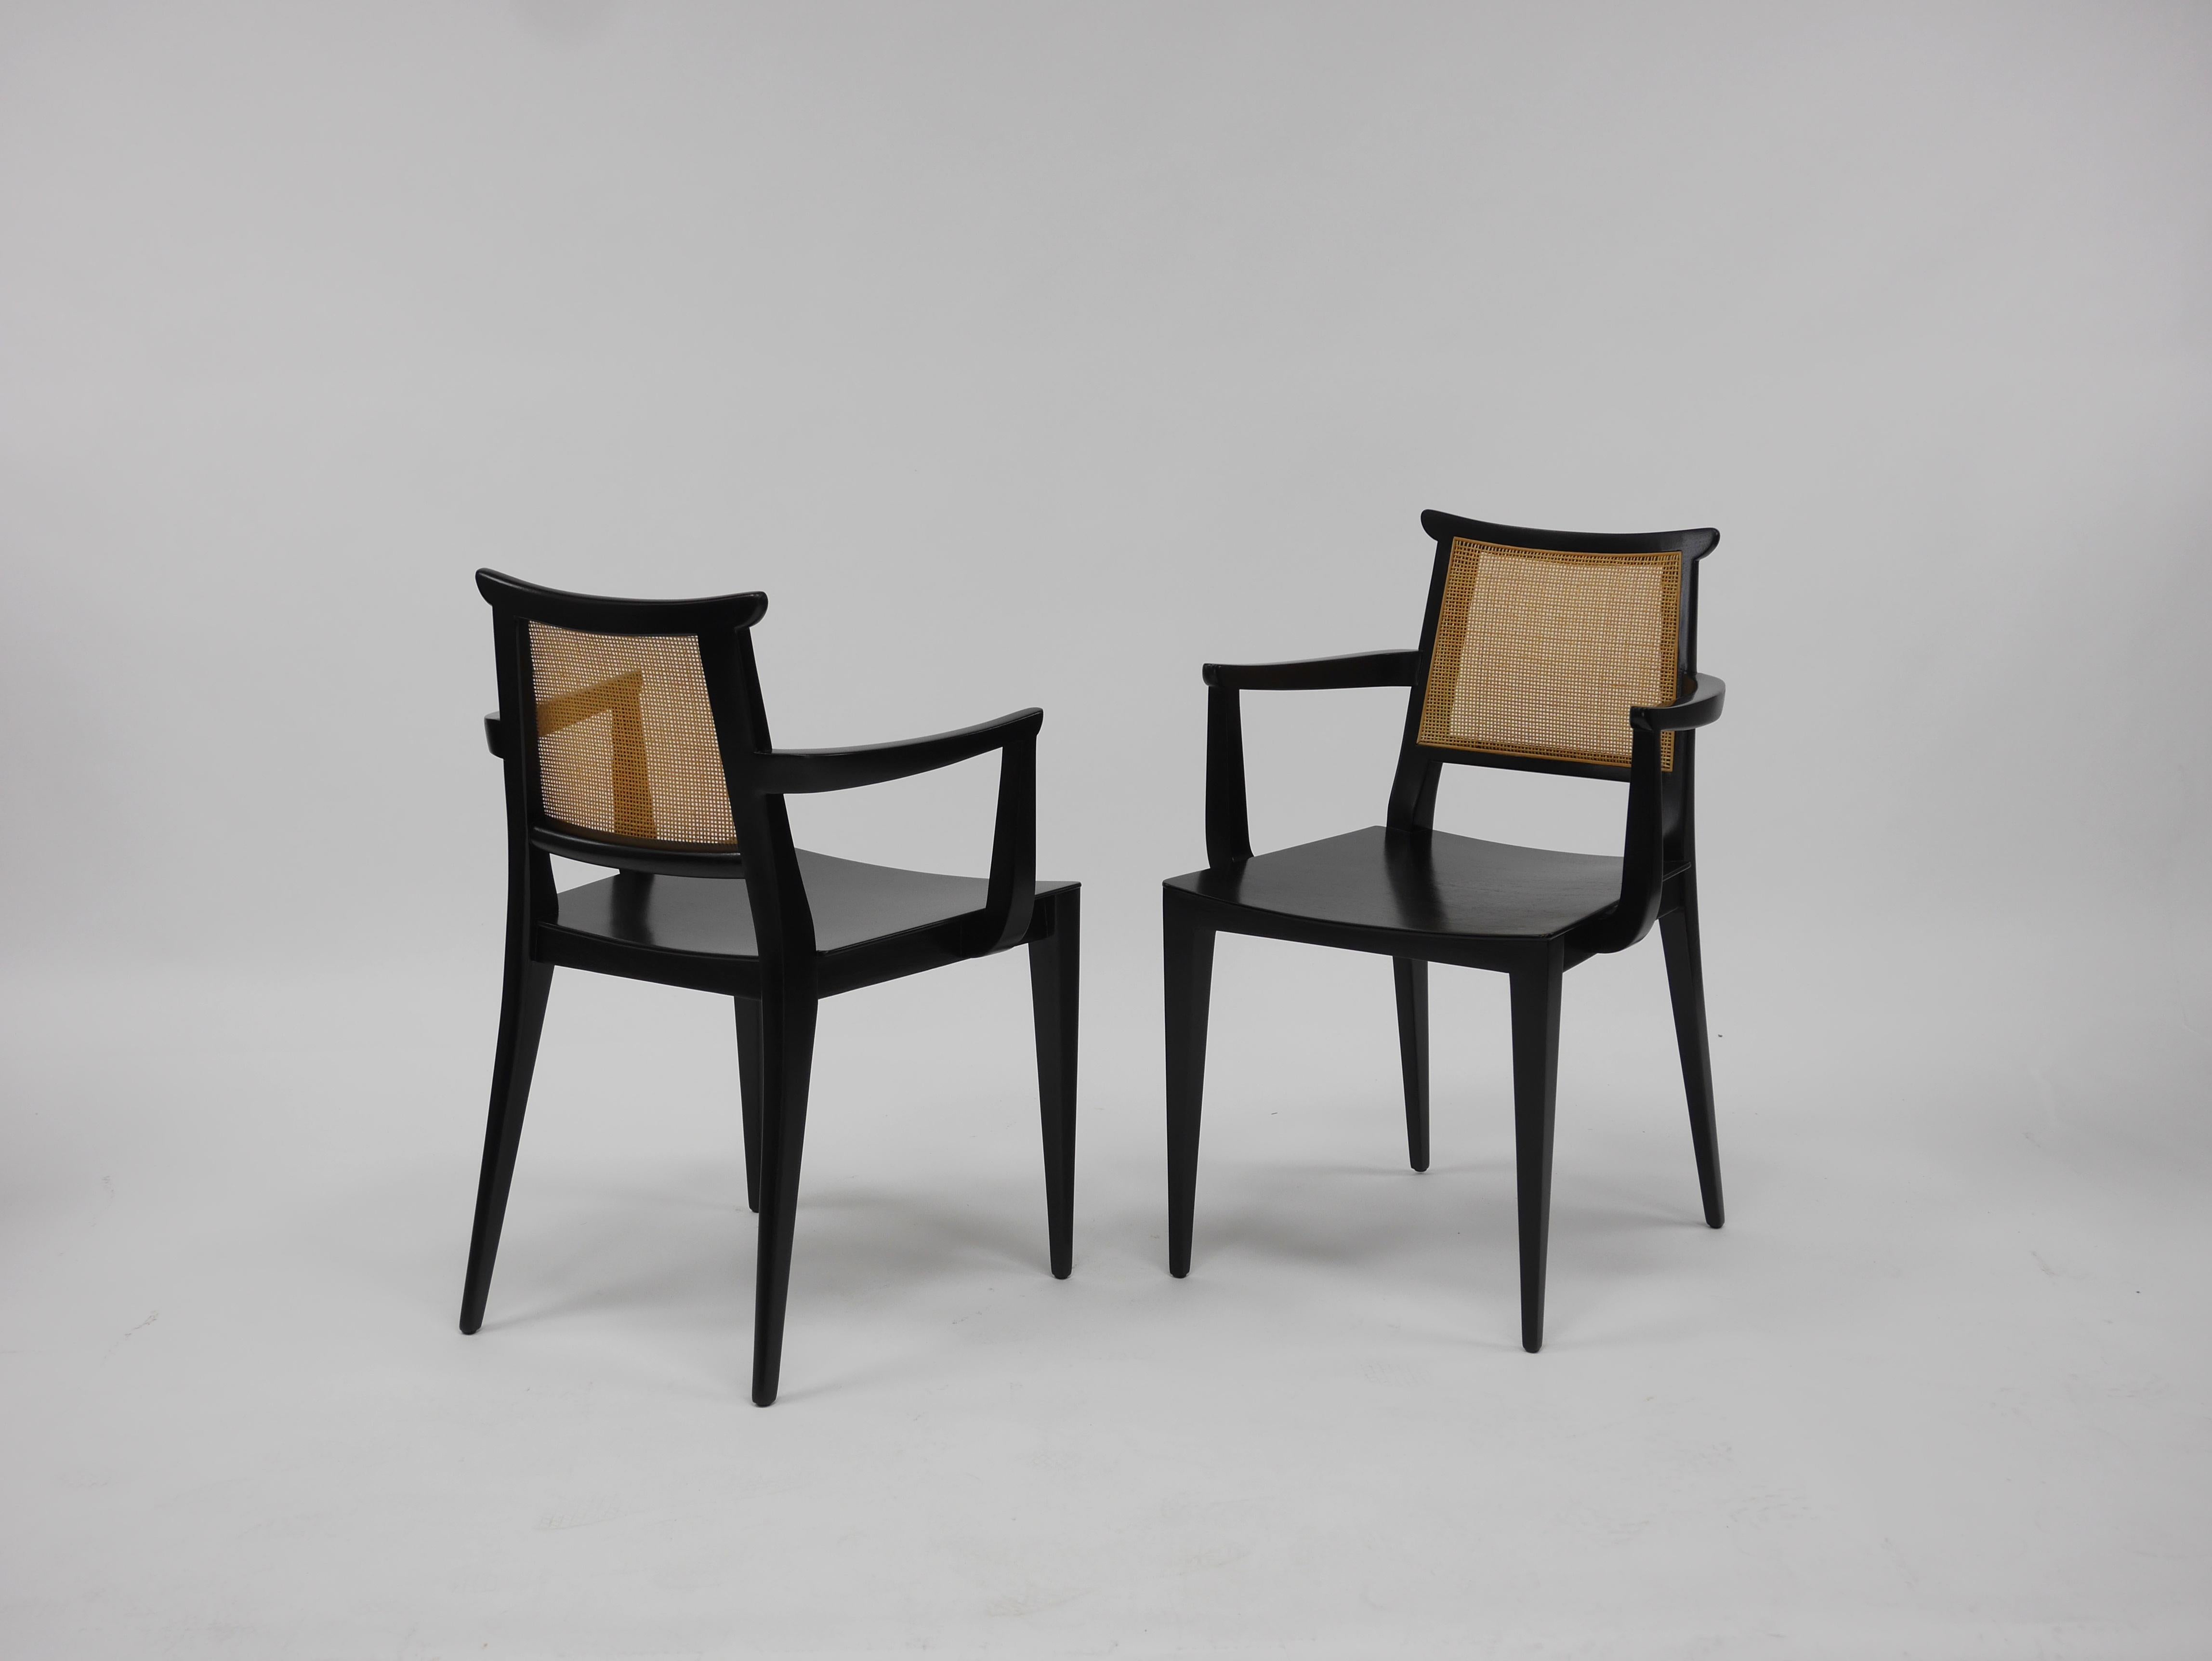 Eight dining chairs by Edward Wormley for Dunbar. Two arm chairs, six side chairs. Having slightly curved mahogany seats, mahogany frames and caned backs. Recent professional restoration including re caning. Marked Dunbar.